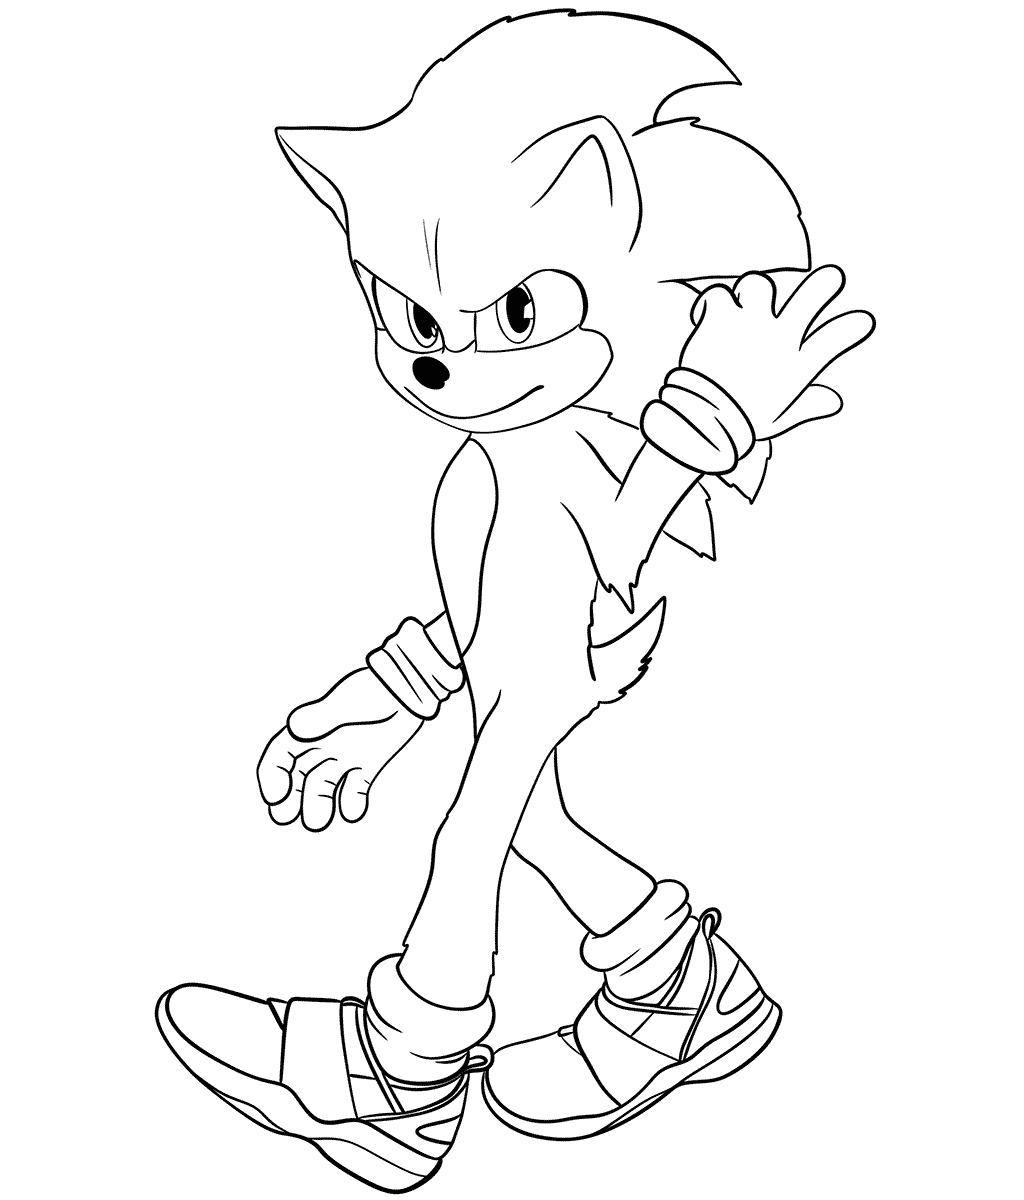 Sonic 2 Movie coloring page - Coloring pages